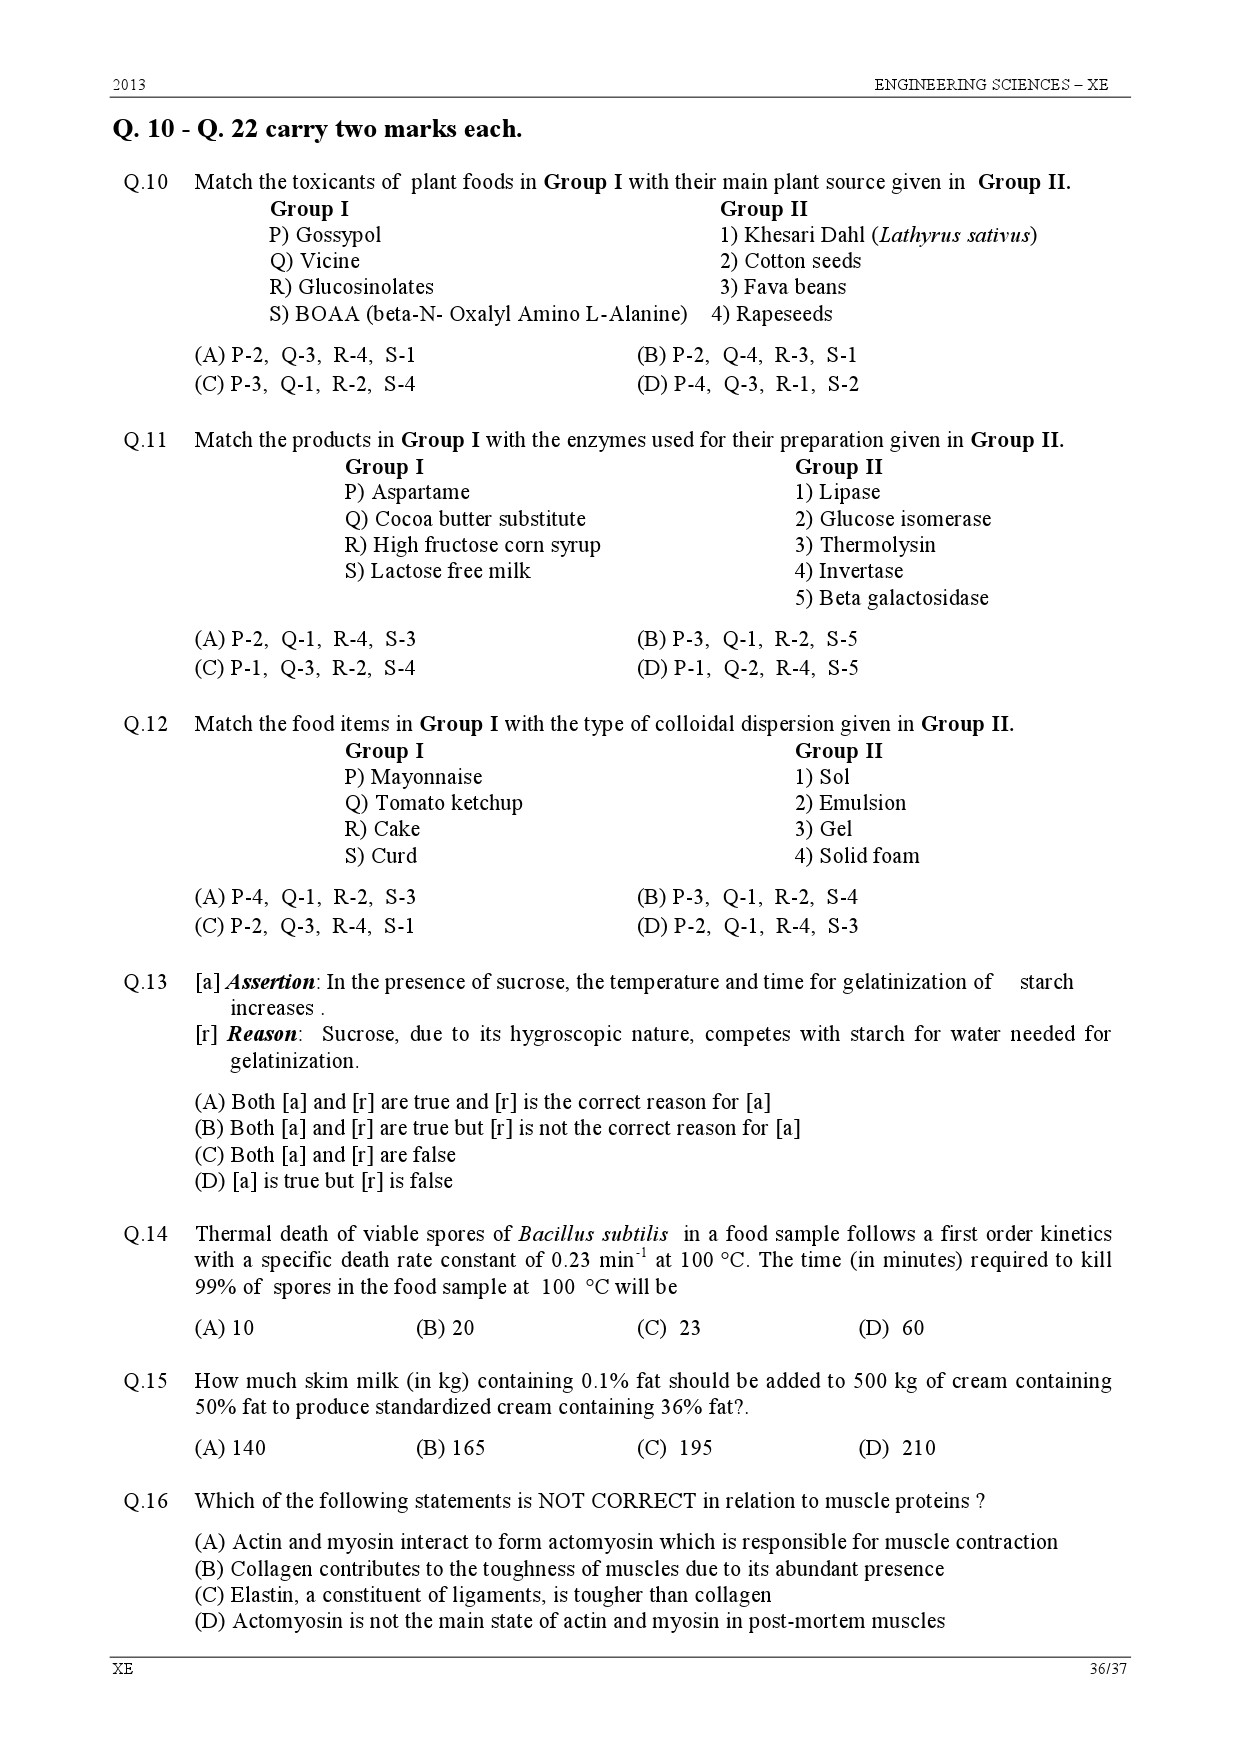 GATE Exam Question Paper 2013 Engineering Sciences 36